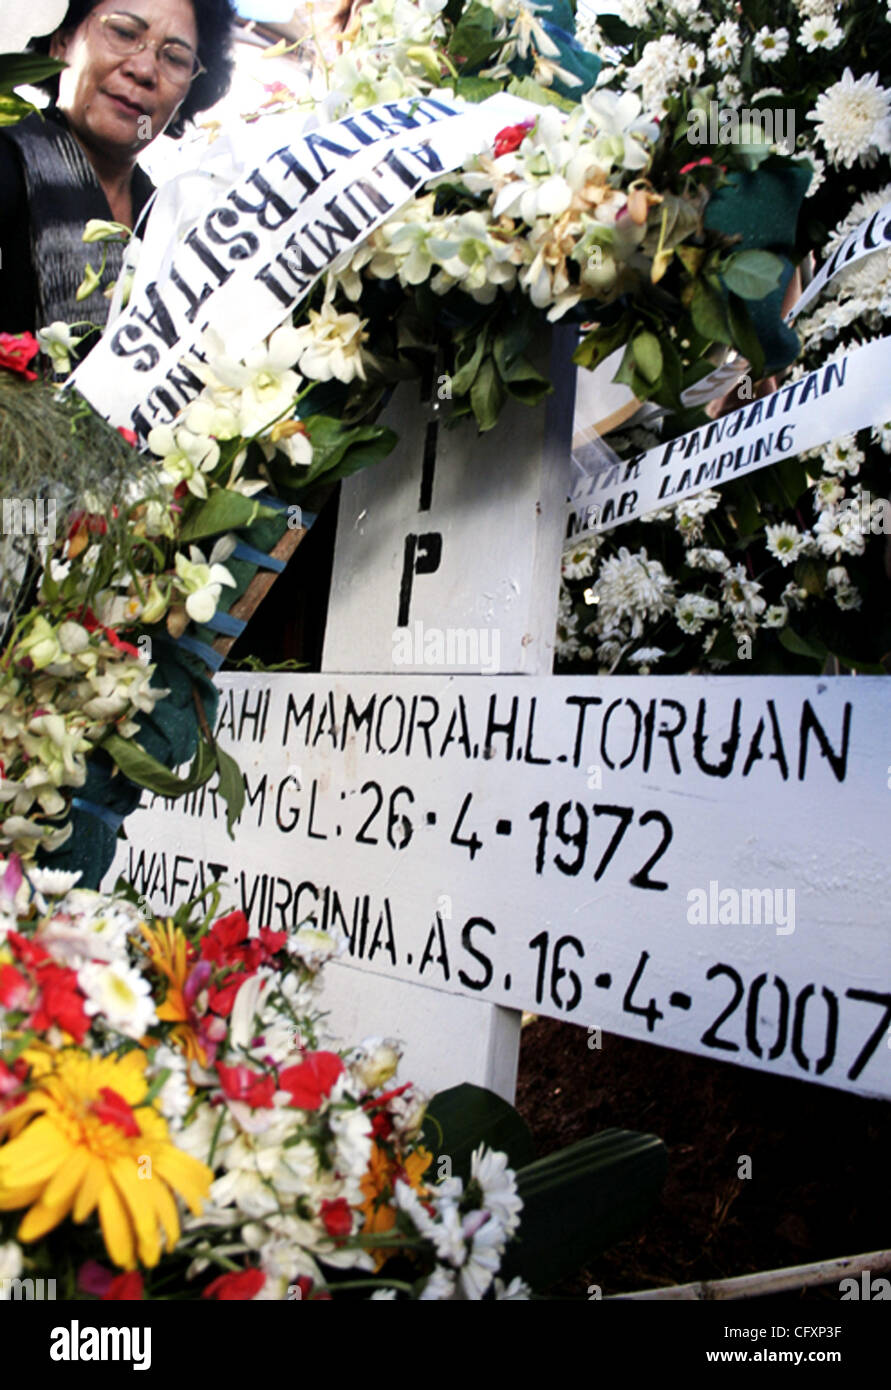 Jakarta, Indonesia  Relative of Partahi Mamora Halomoan Lumbantoruan (a.k.a Mora) who died on Viginia Tech, Virginia, United States,  pray in Mora's grave in Menteng Pulo public Cemetary in South Jakarta (April 23, 2007).  Mora was one of 32 students who shot by Korean, Cho Seung-hui inside his camp Stock Photo